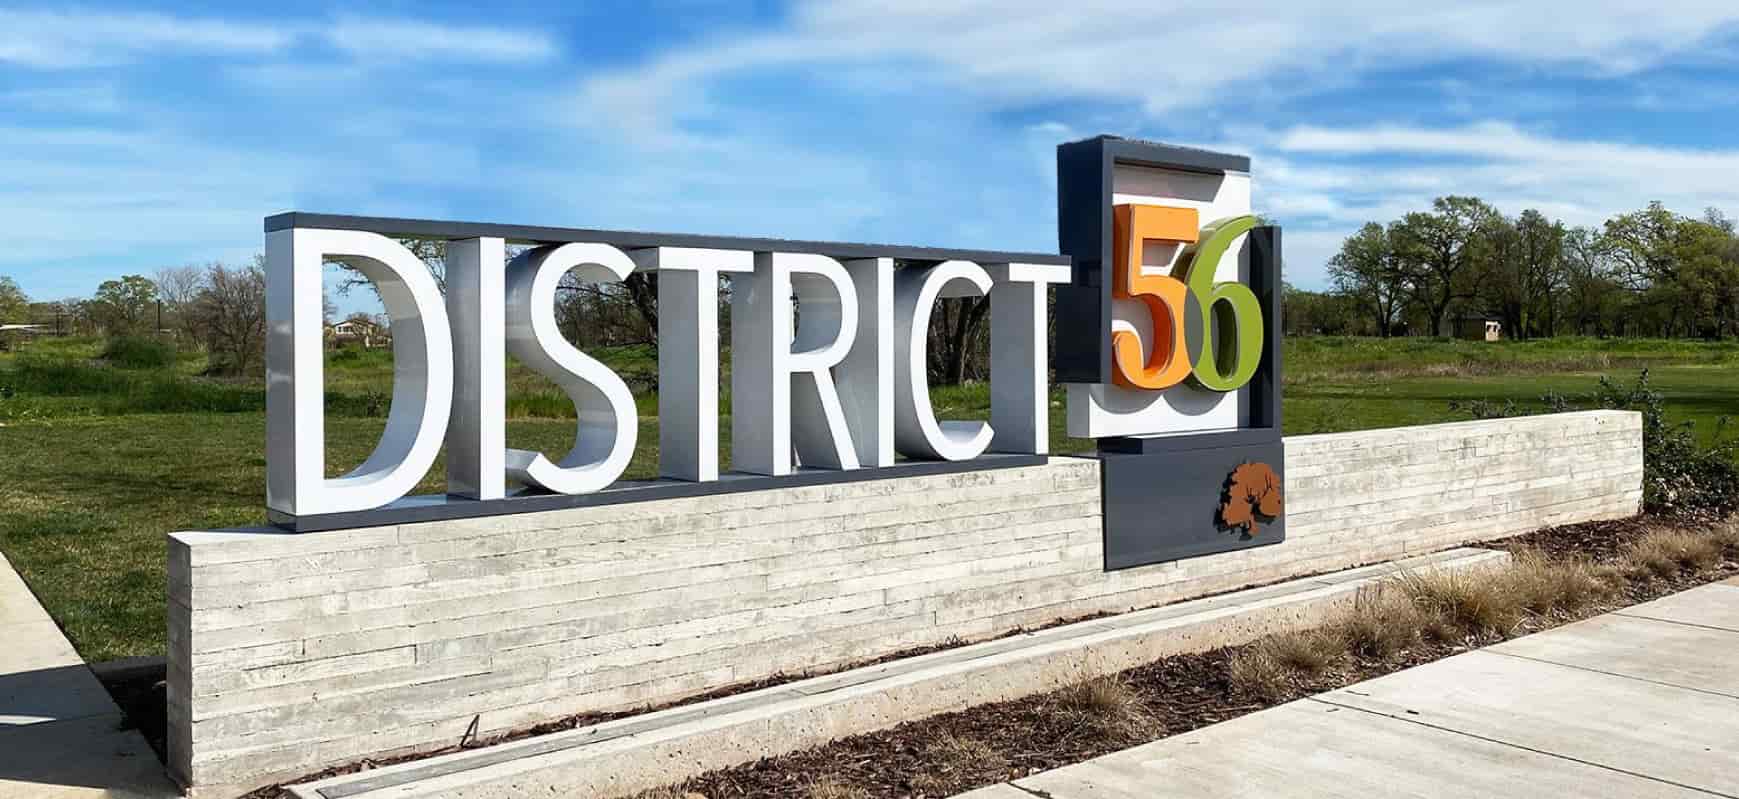 District 56 modern signage displaying the brand name and logo made of aluminum and lexan